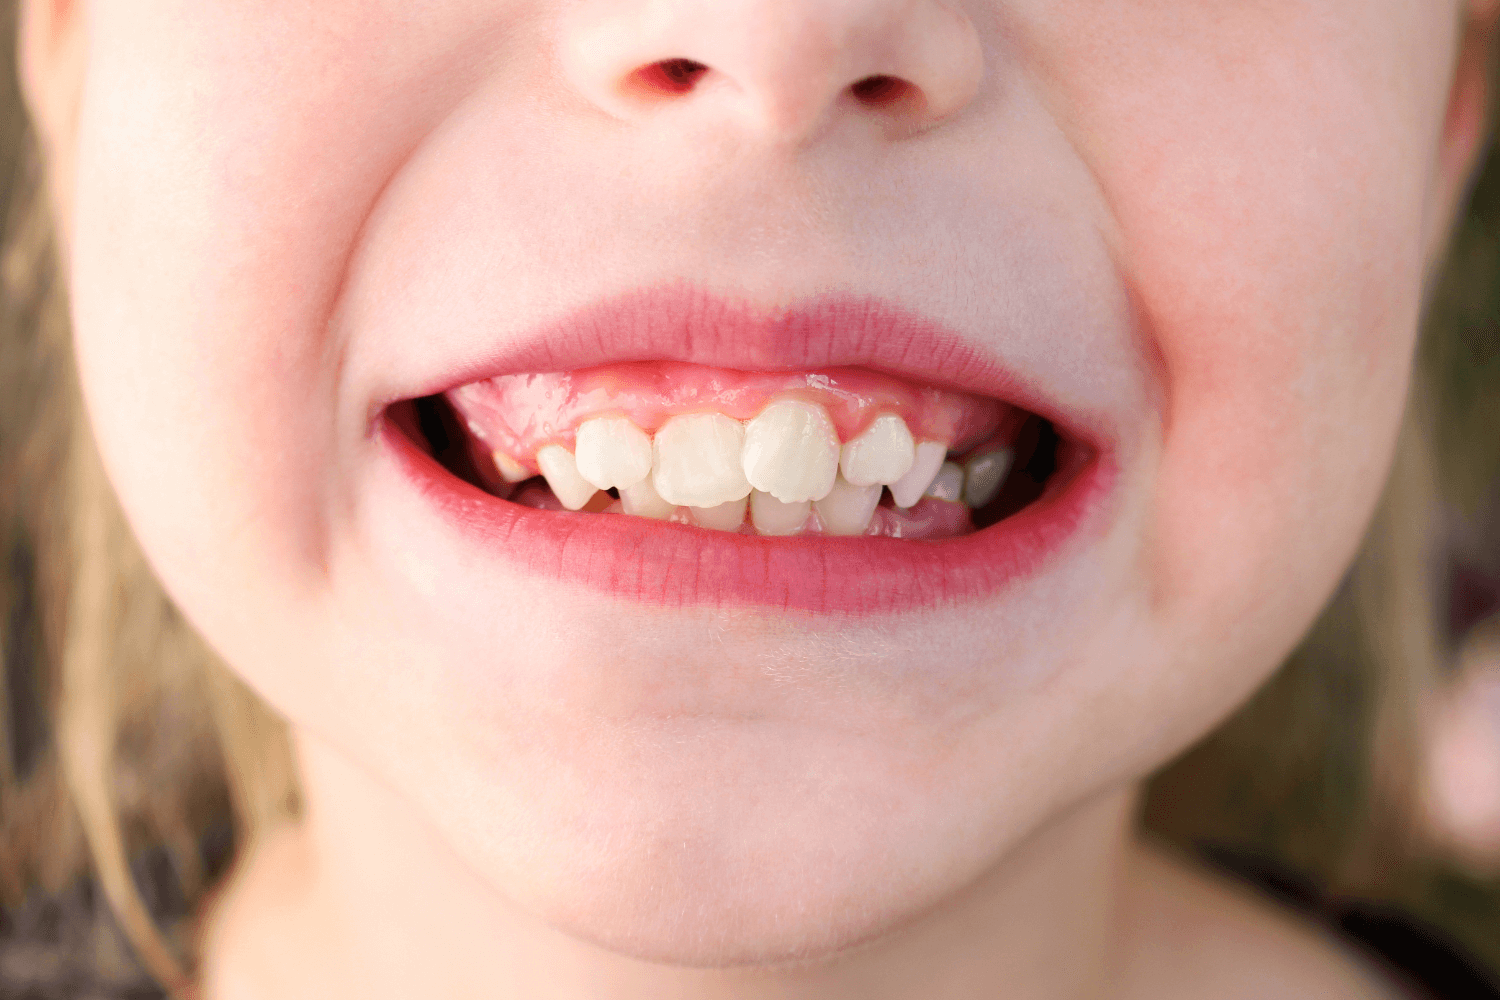 Child Showing Off Their Teeth